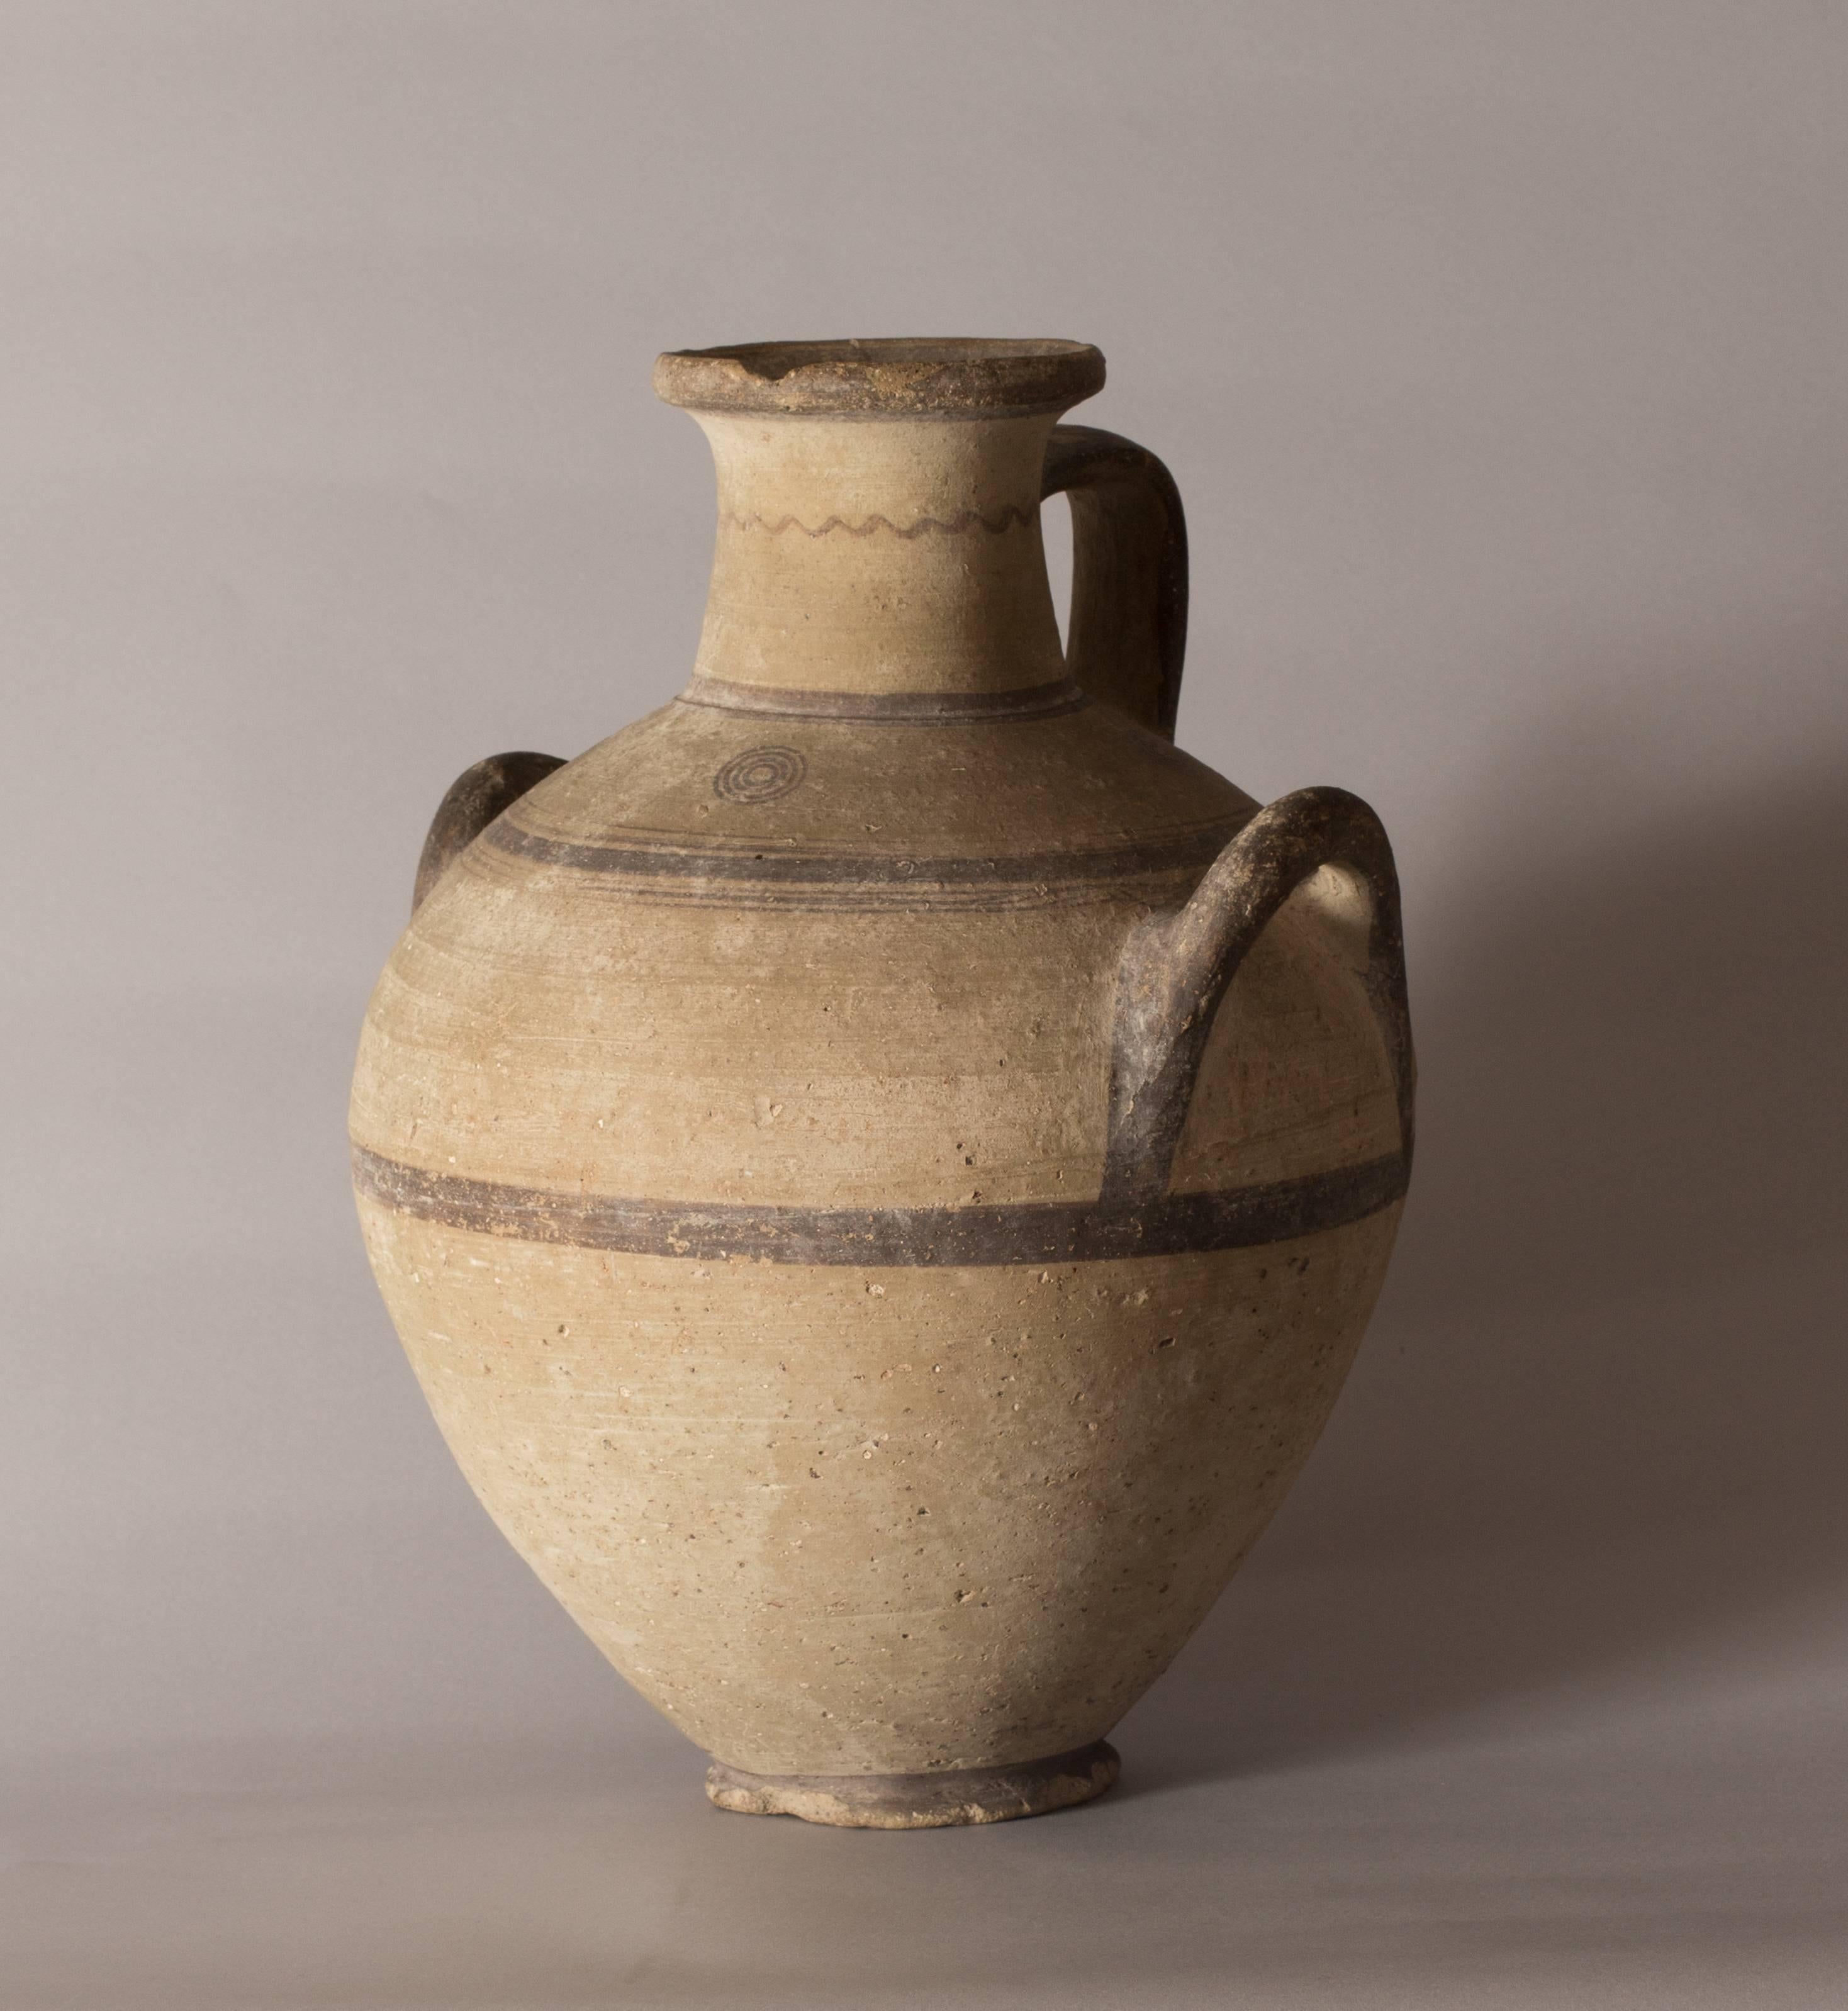 A CYPRIOT IRON AGE POTTERY HYDRIA, C. 1050 - 850 B.C., CYPRO-GEOMETRIC - Art by Unknown